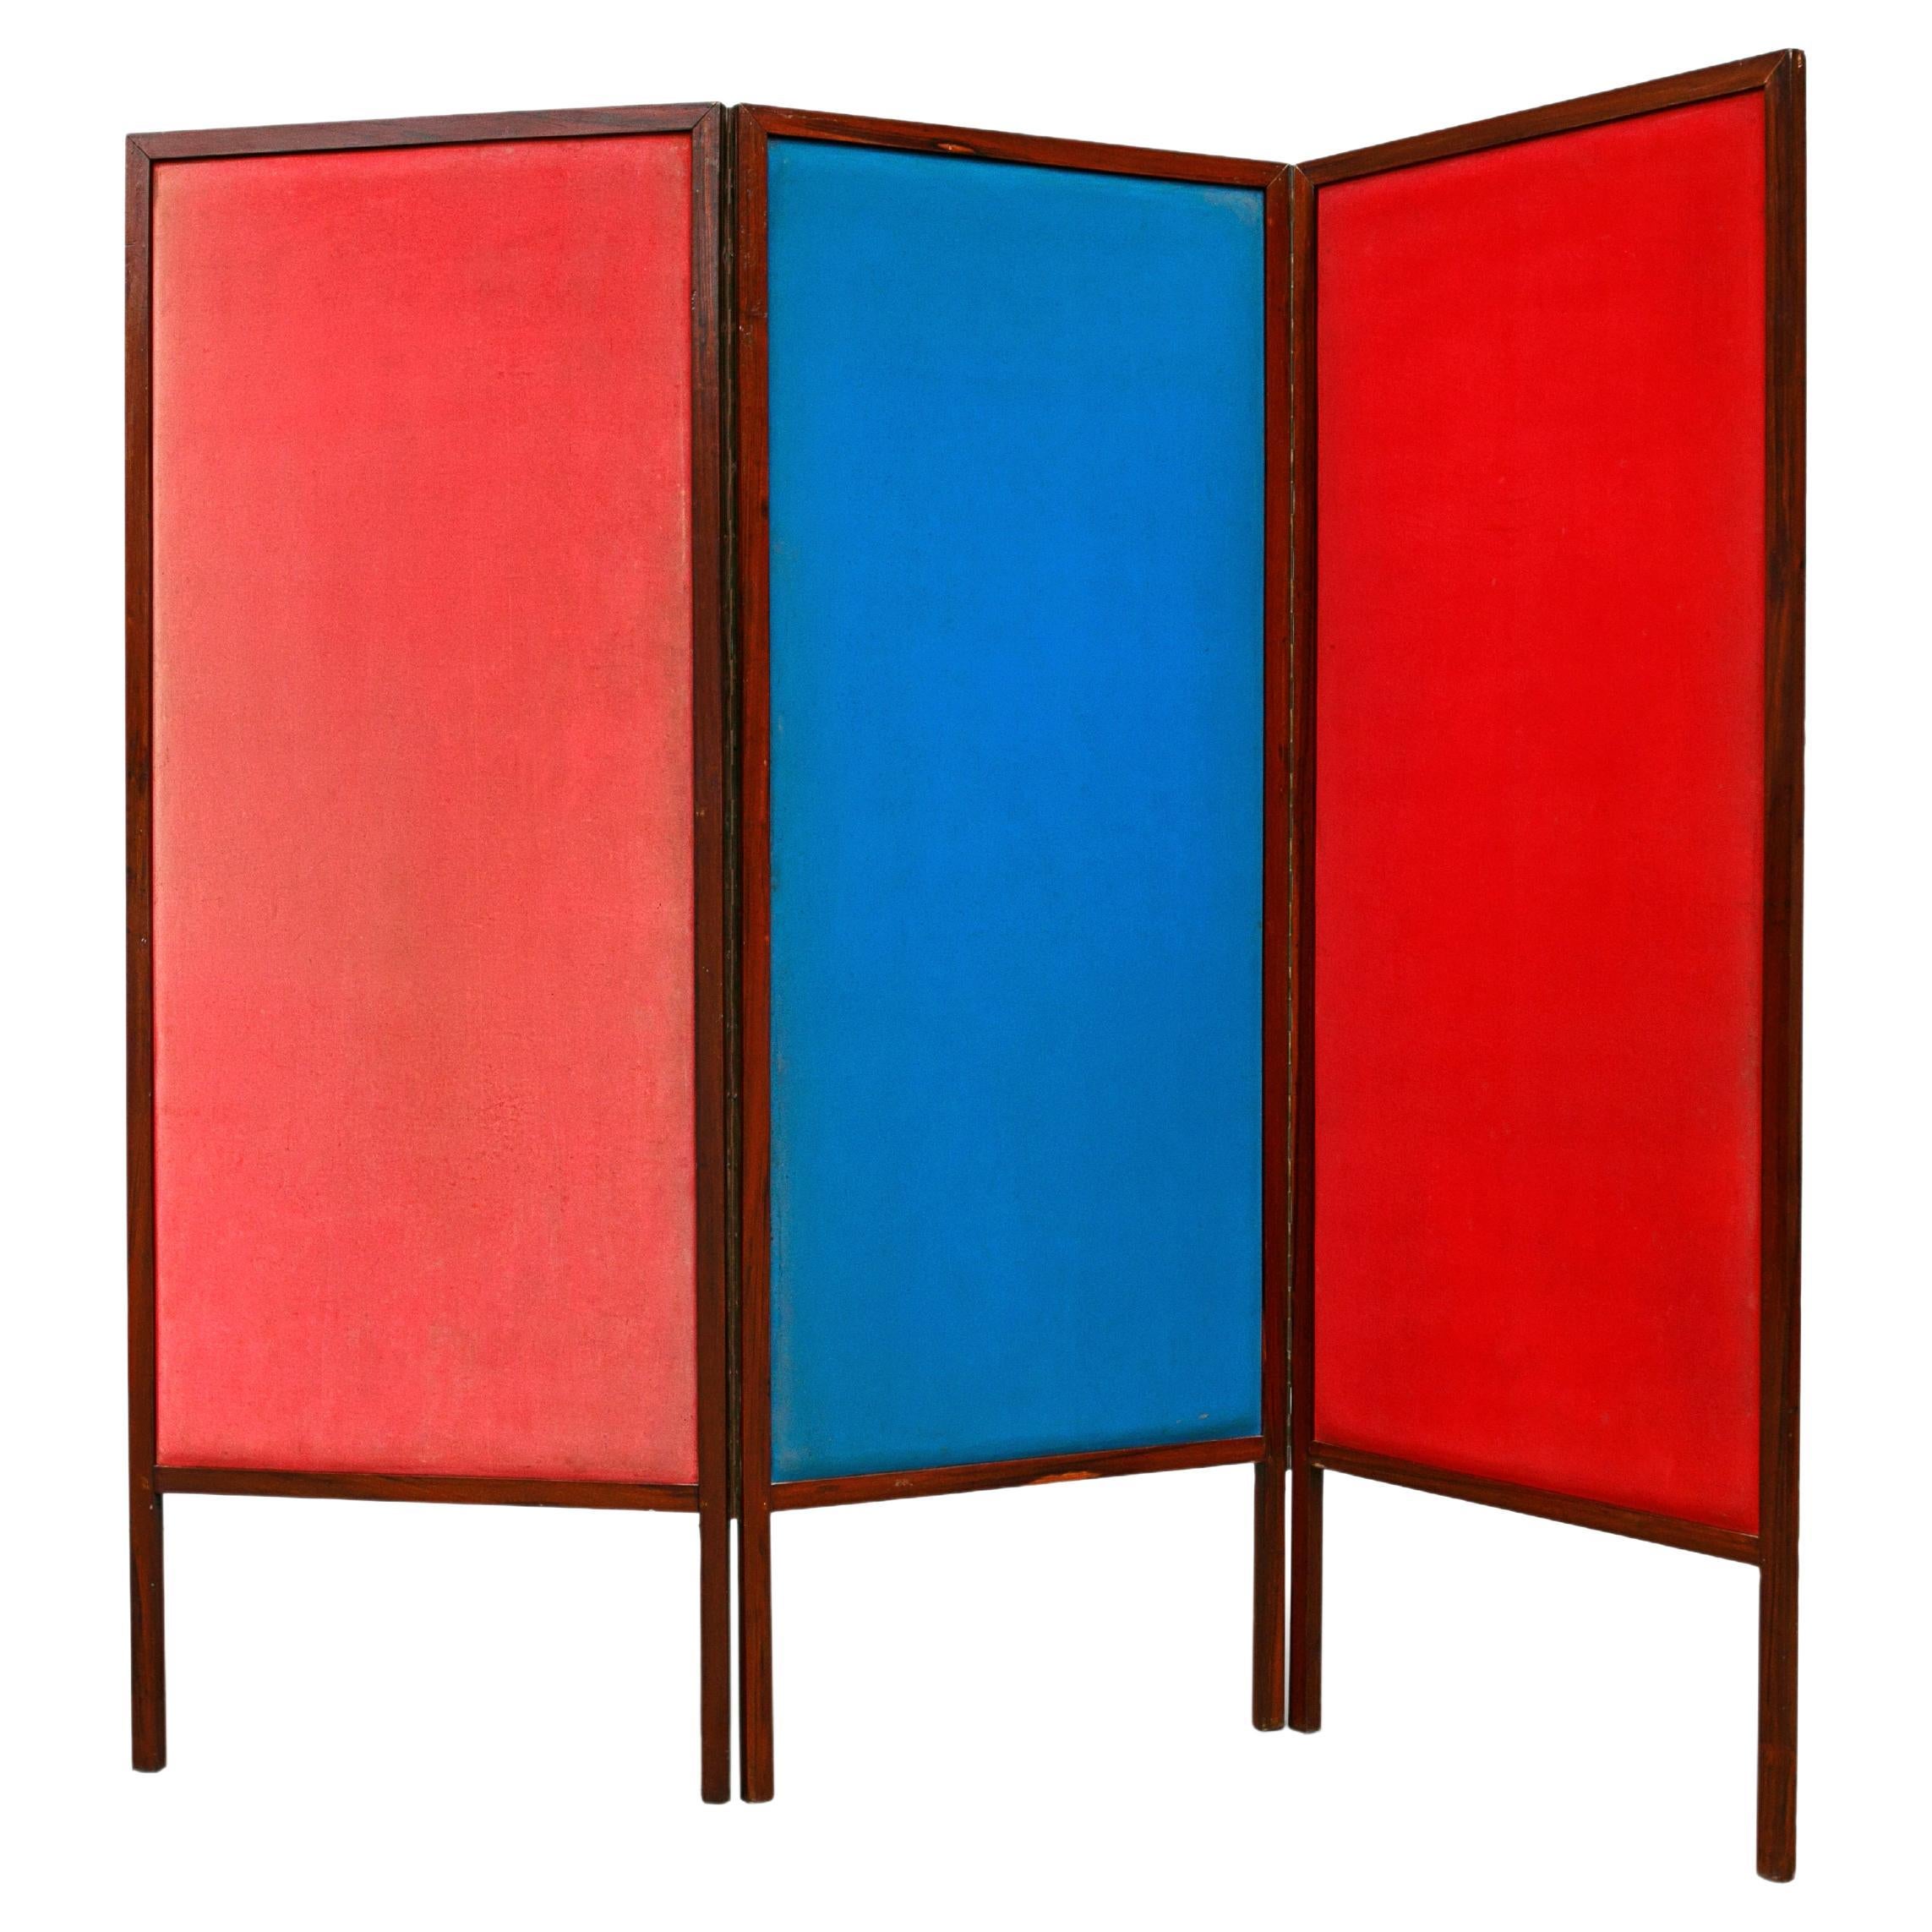 Brazilian Modern Room Divider in Hardwood & Leather by Sergio Rodrigues, 1960s